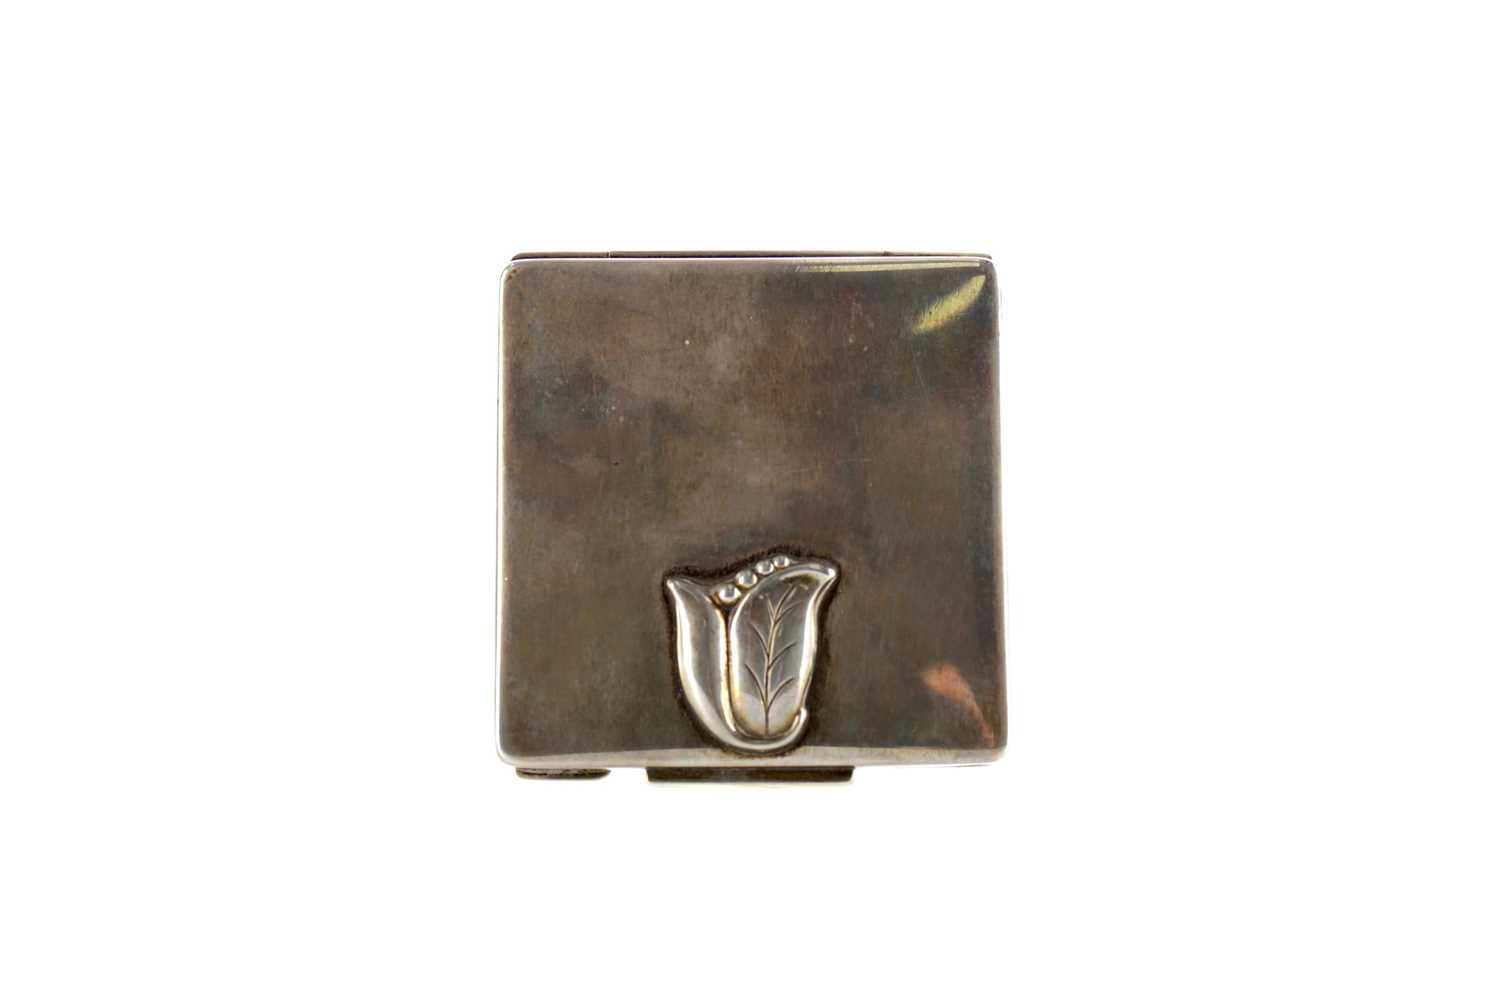 Lot 1701 - A STERLING SILVER SQUARE COMPACT BY GEORG JENSEN